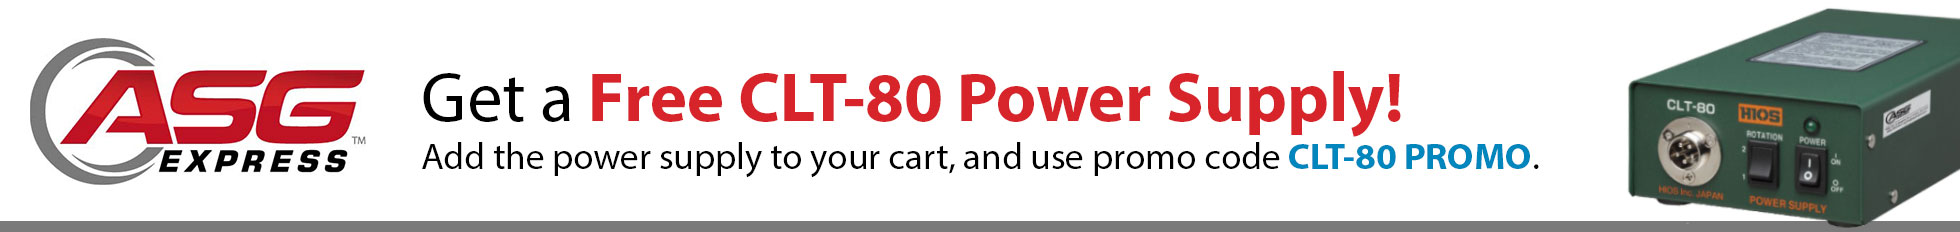 Get a free CLT-80 Power Supply when you buy this ASG Torque Driver